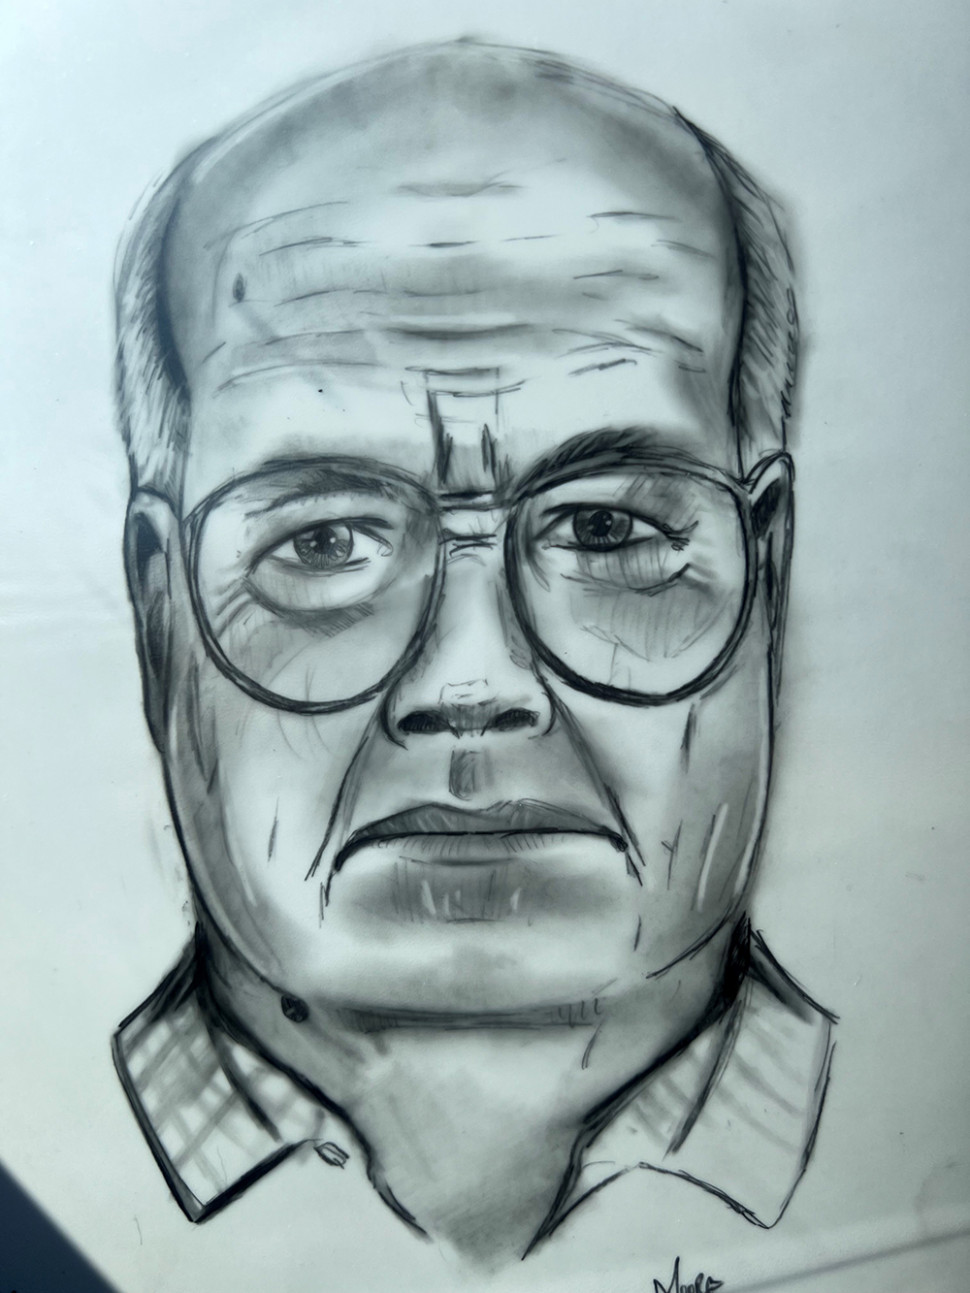 Pierceland RCMP are seeking more information about a suspect described as older male, with a heavy build and balding white hair regarding an August 2 incident.